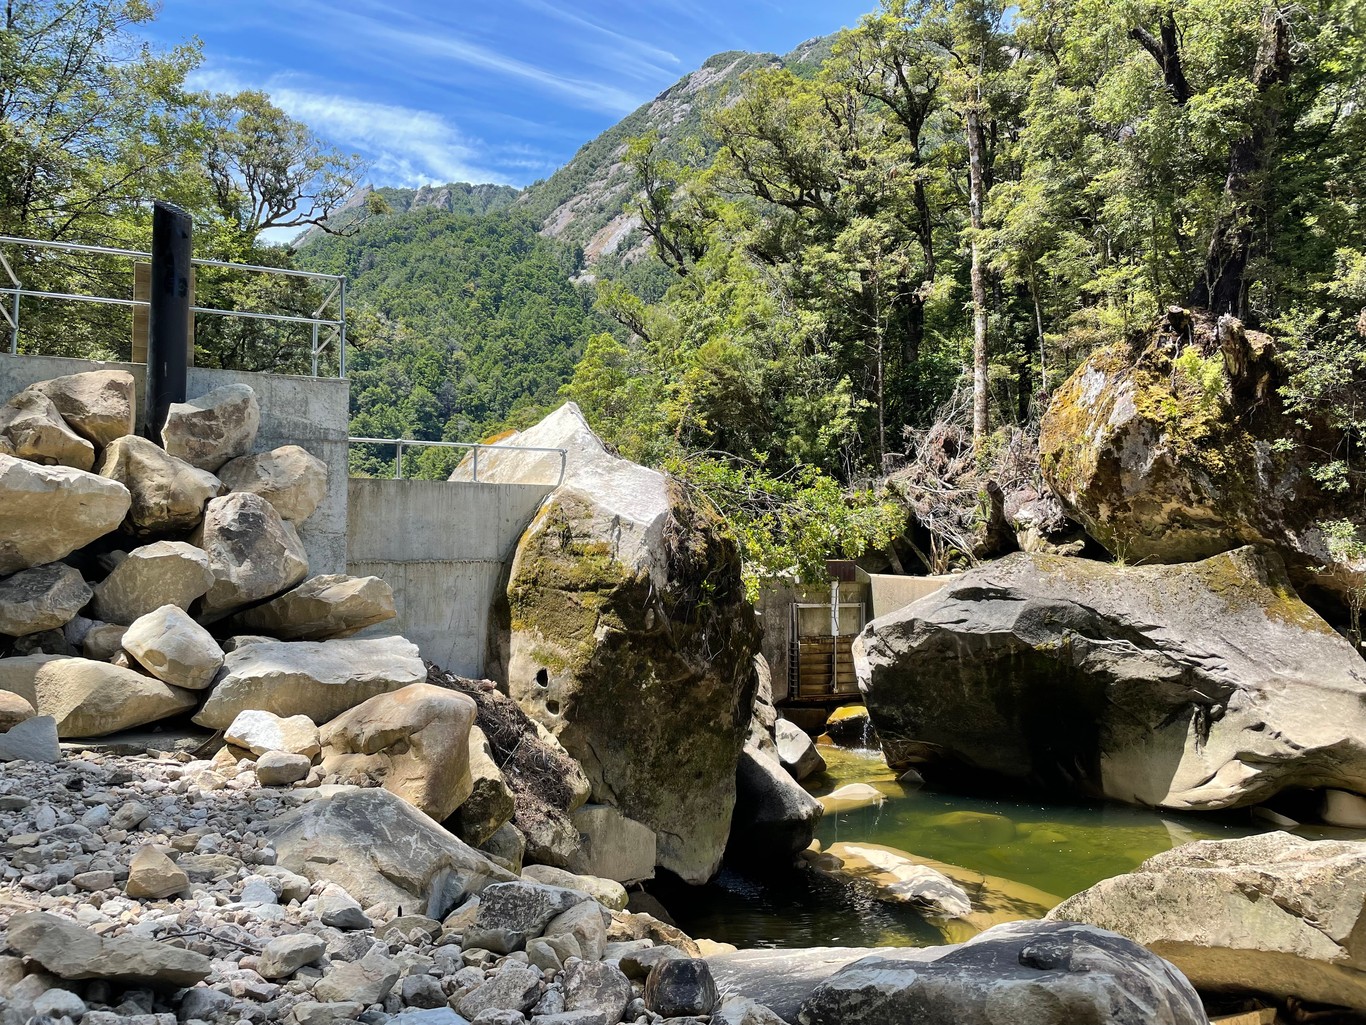 A weir with a control gate, surrounded by large boulders